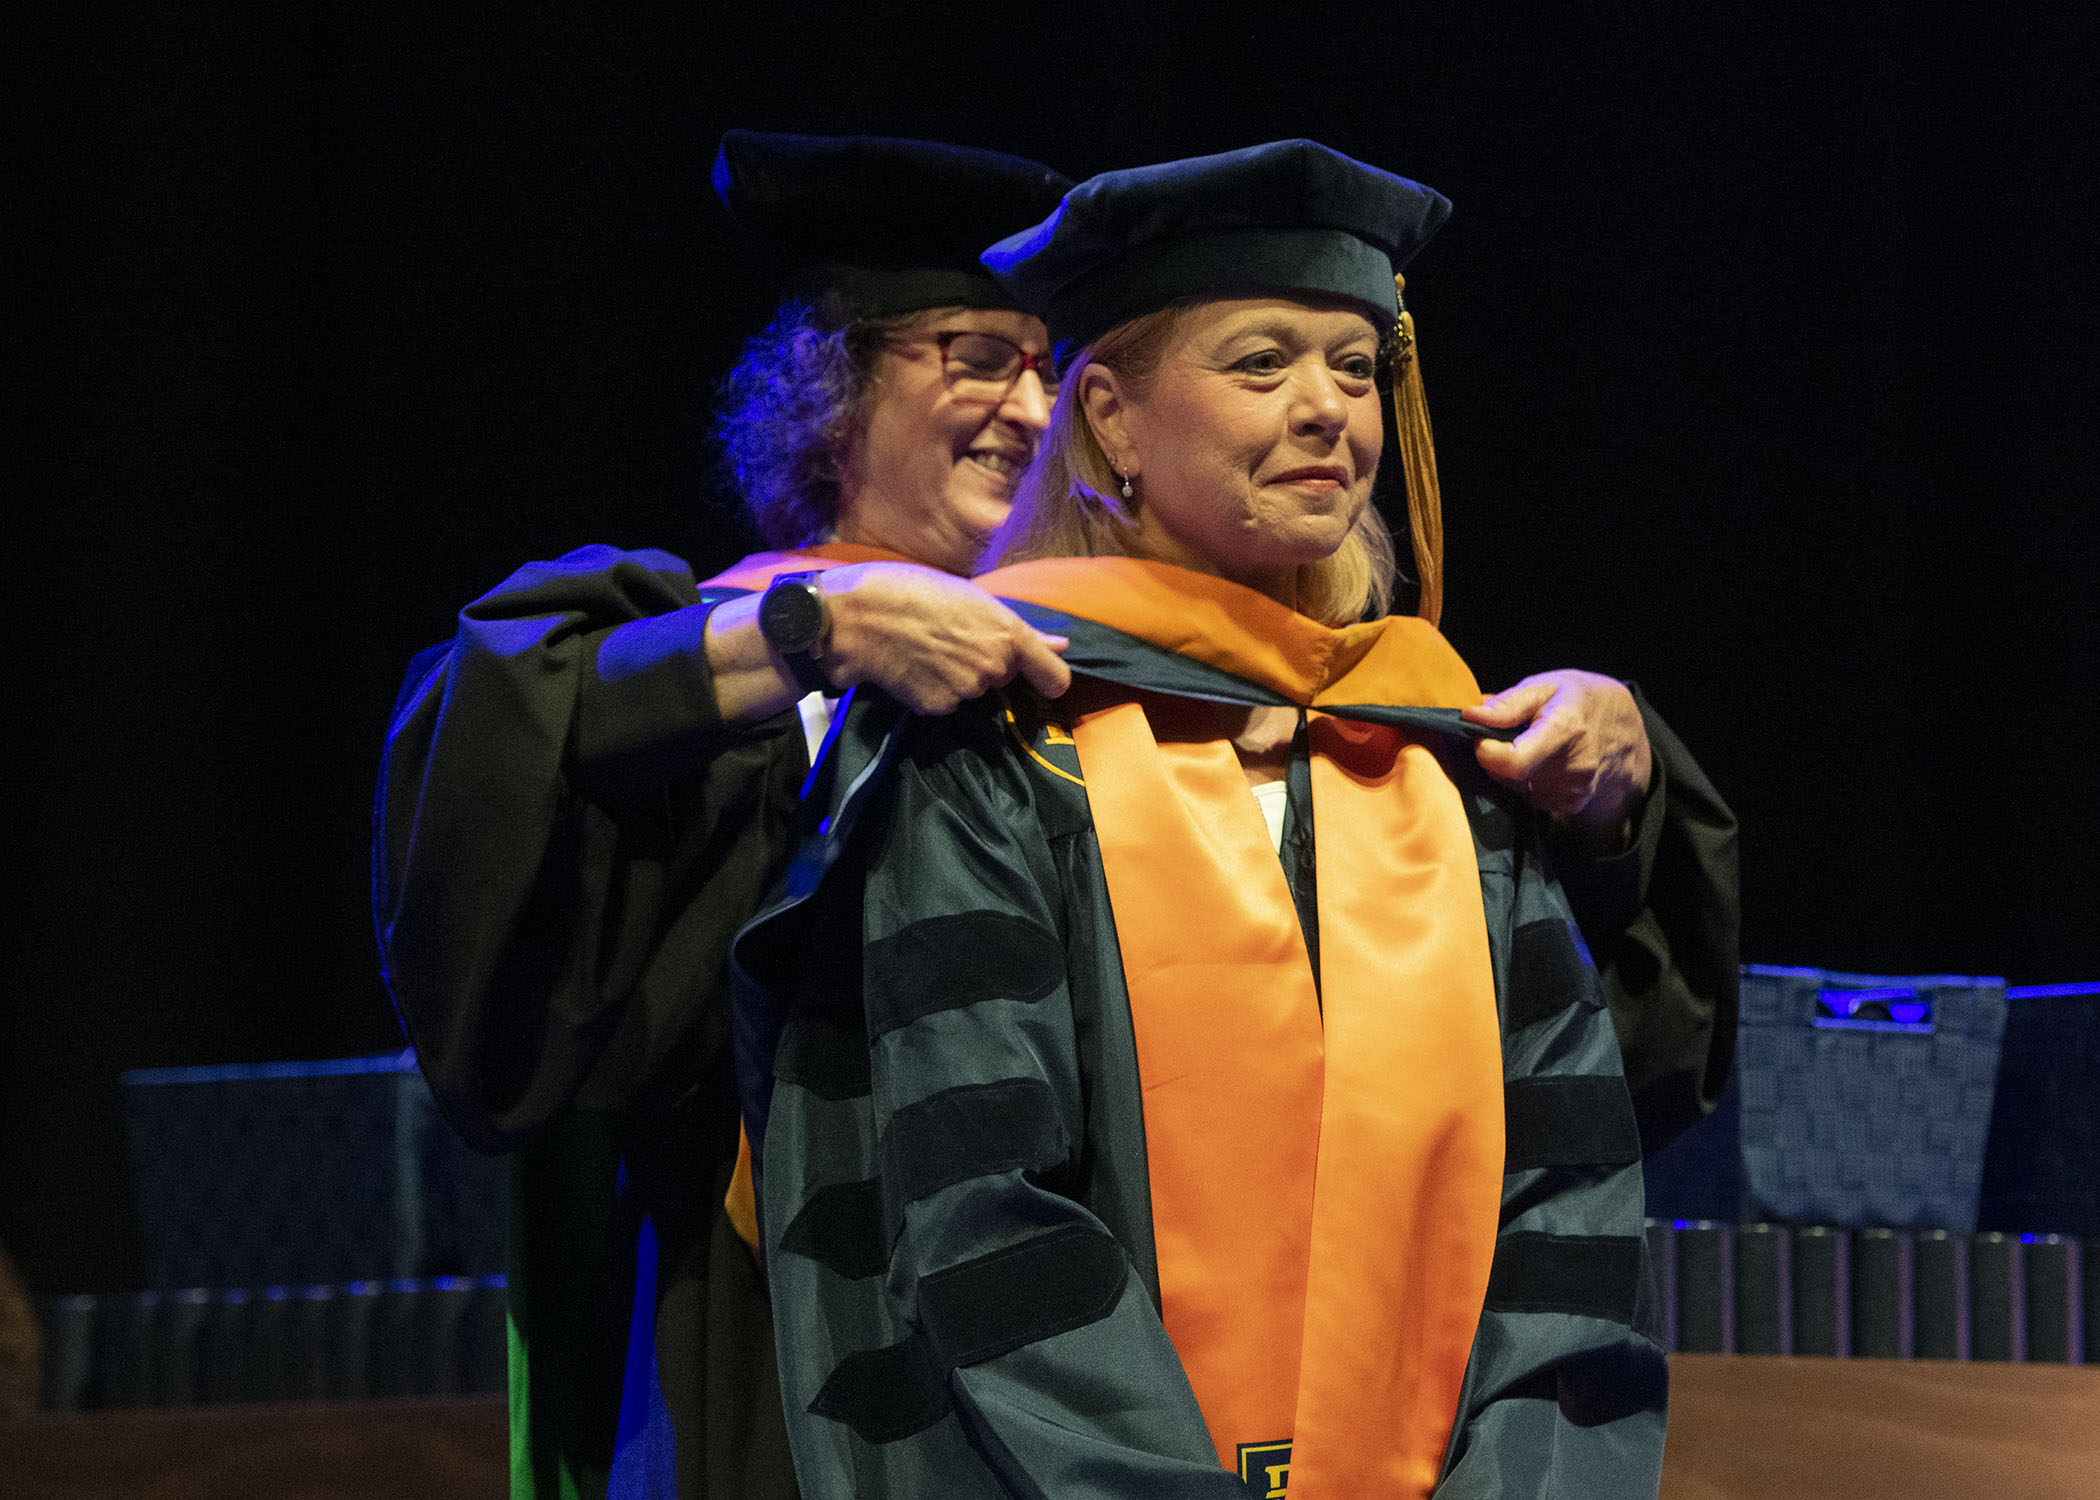 A woman receives her doctoral hood from a College of Nursing representative at graduation.